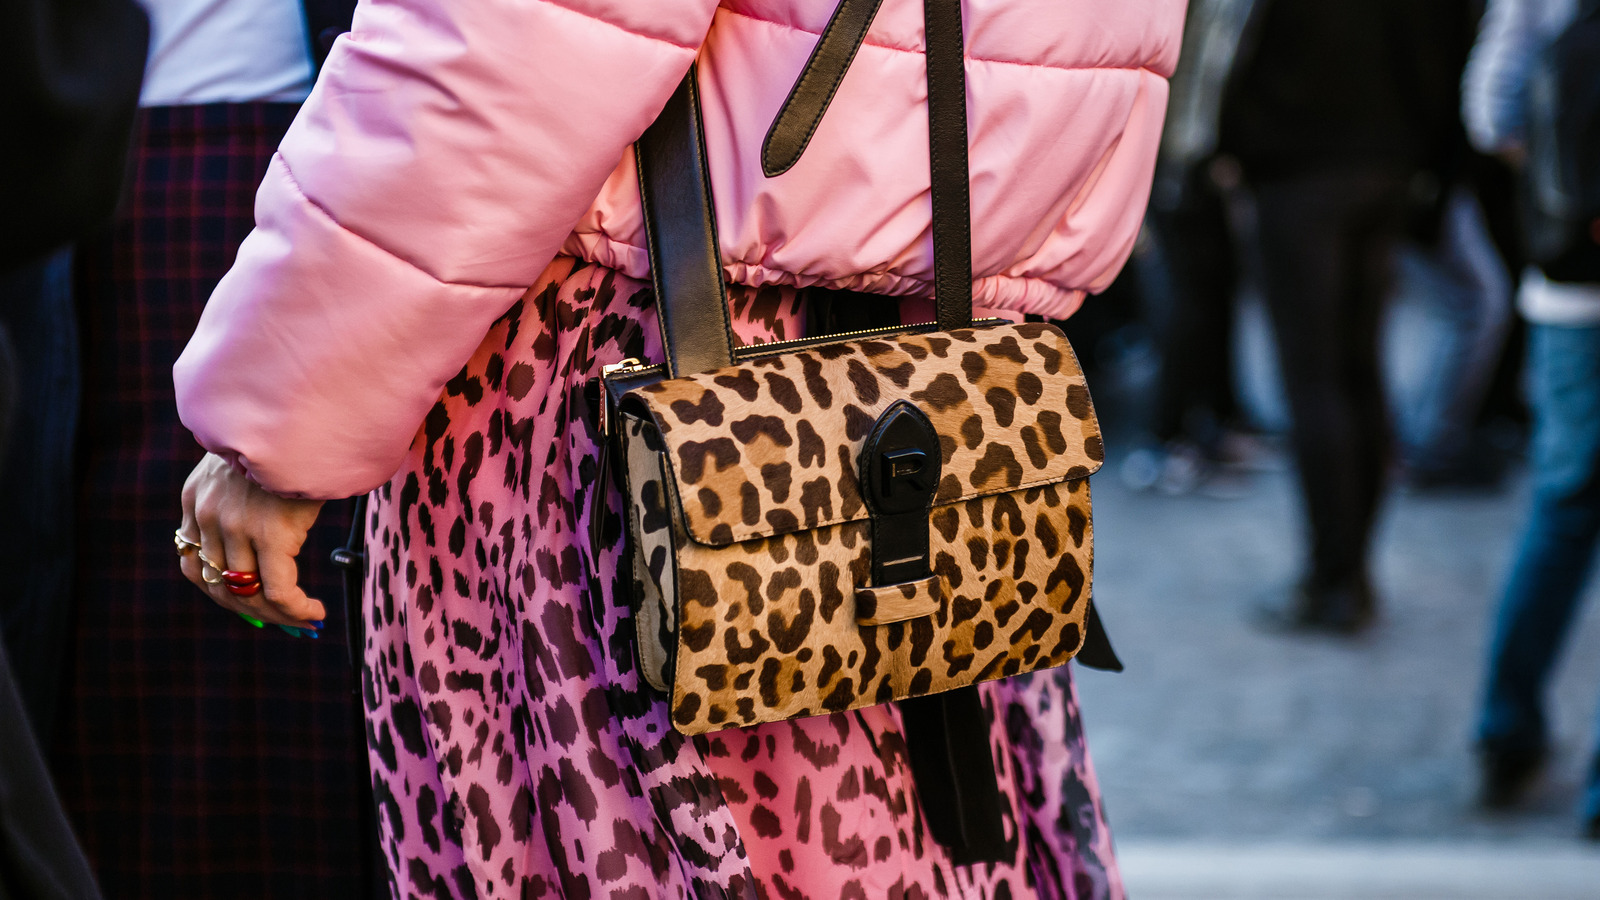 The Hottest New Trend Replacing Animal Print Isn't What You'd Expect